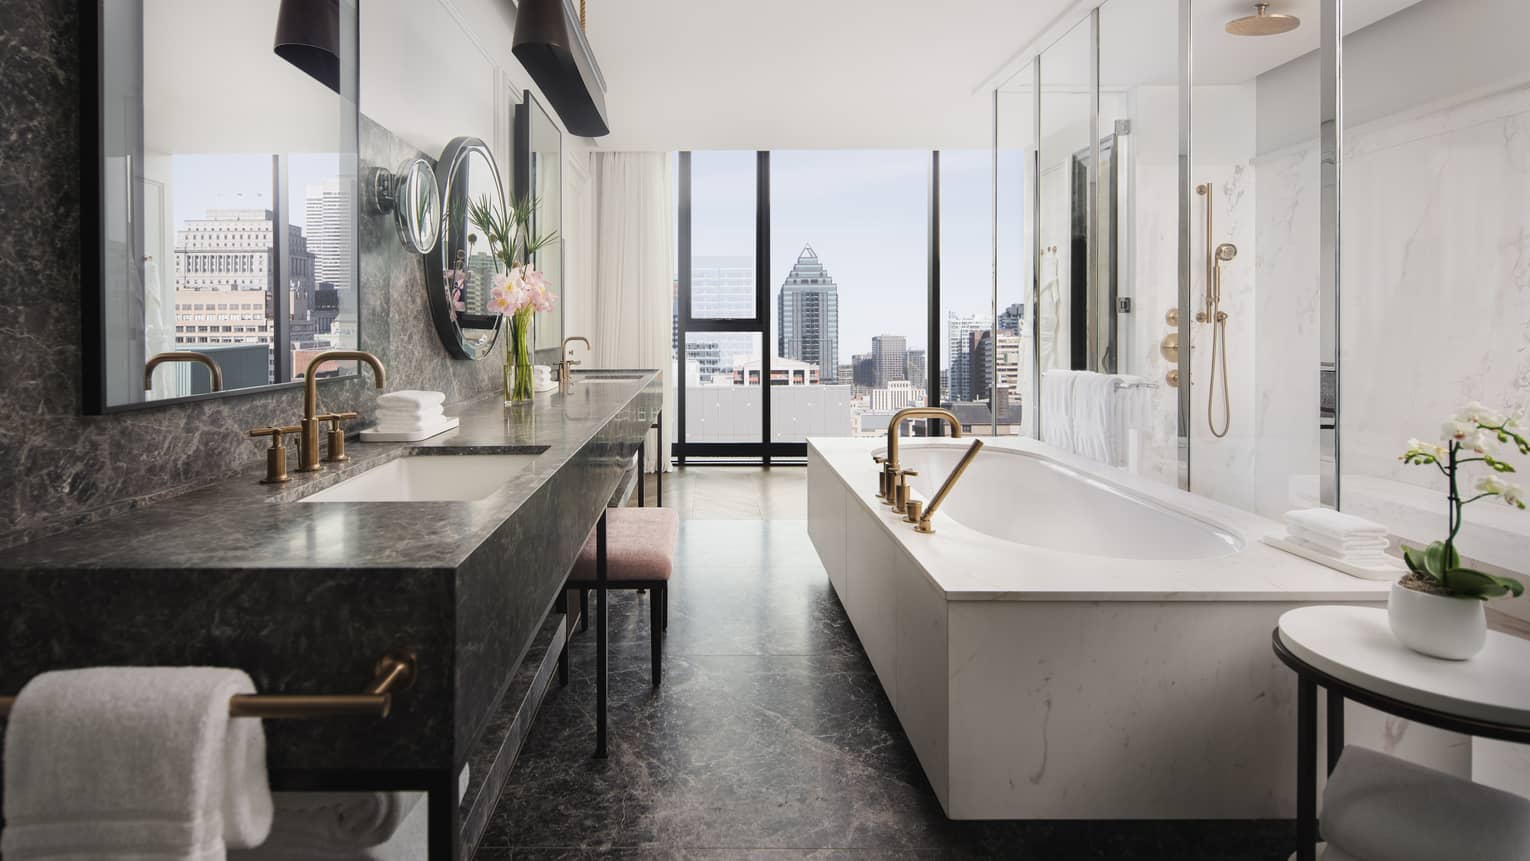 Large master bathroom with tub and glass wall into shower, city view